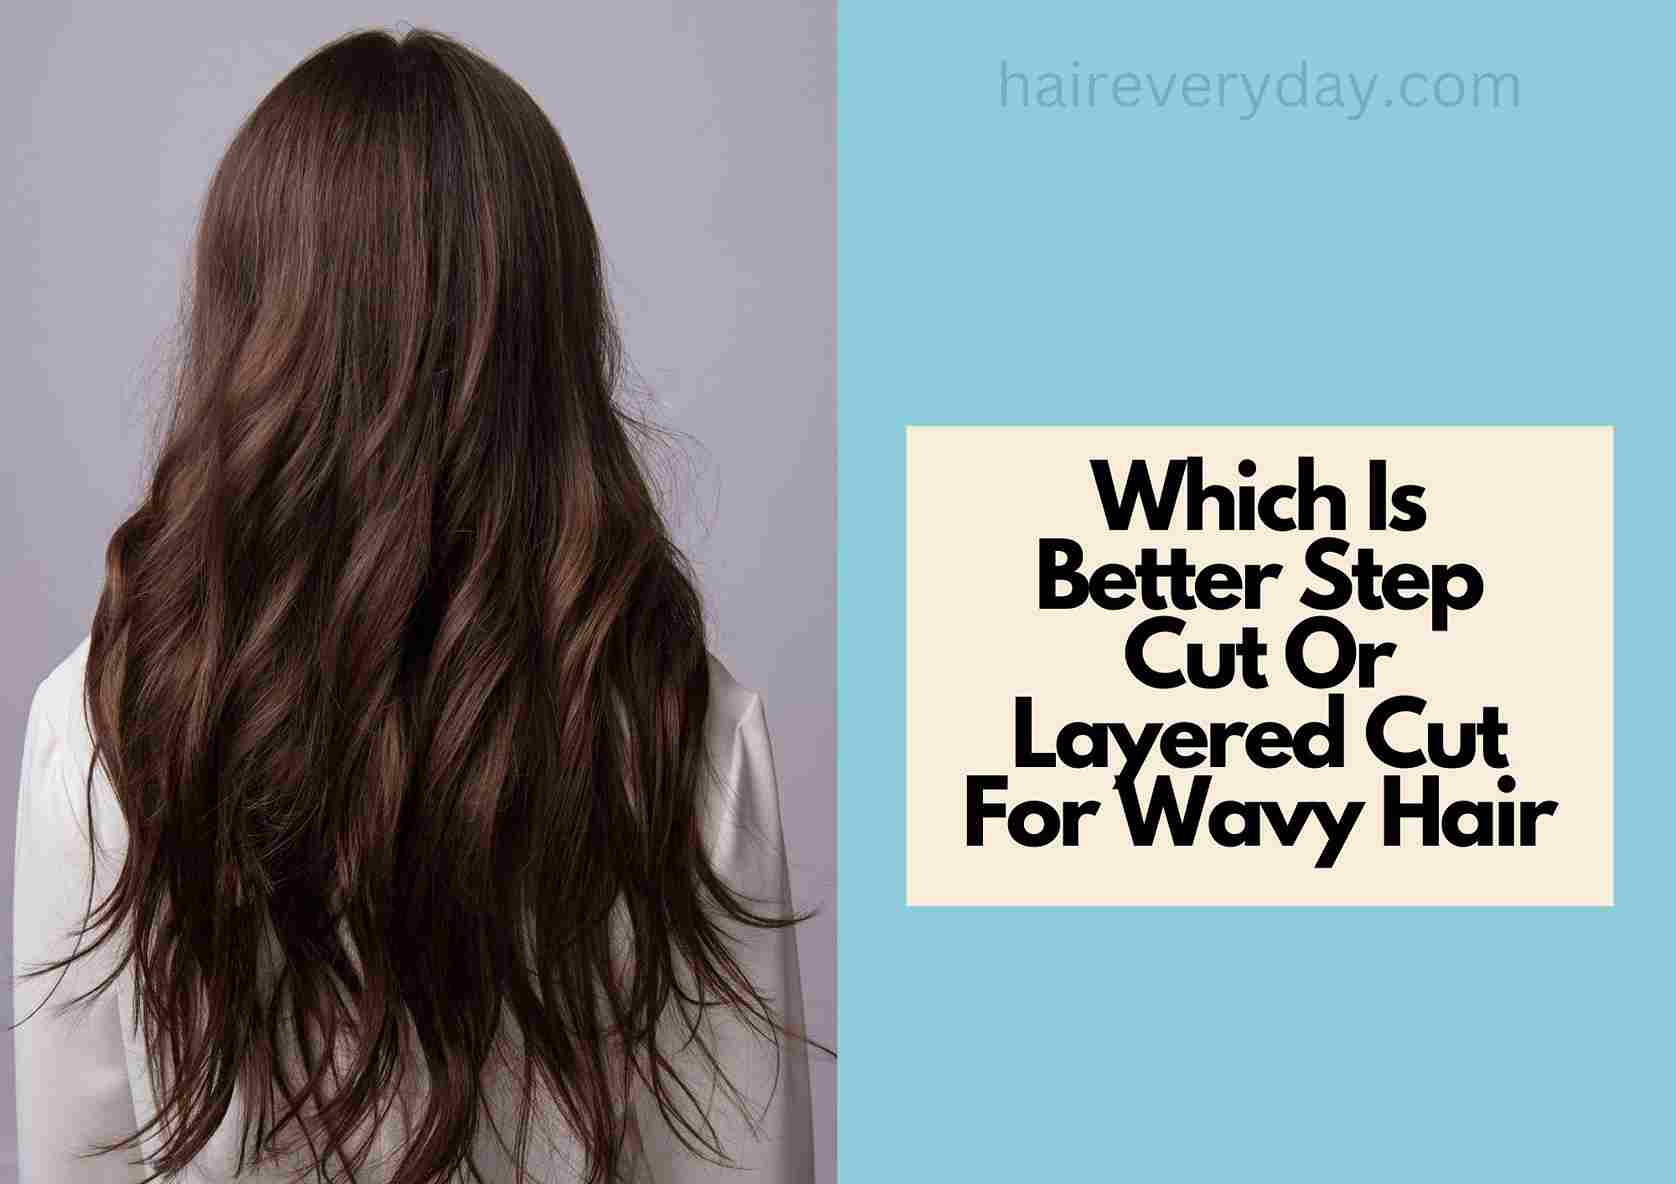 5 Steps To Simplify Curly/Wavy Hair Care (type 2a-3a) - Colleen Charney